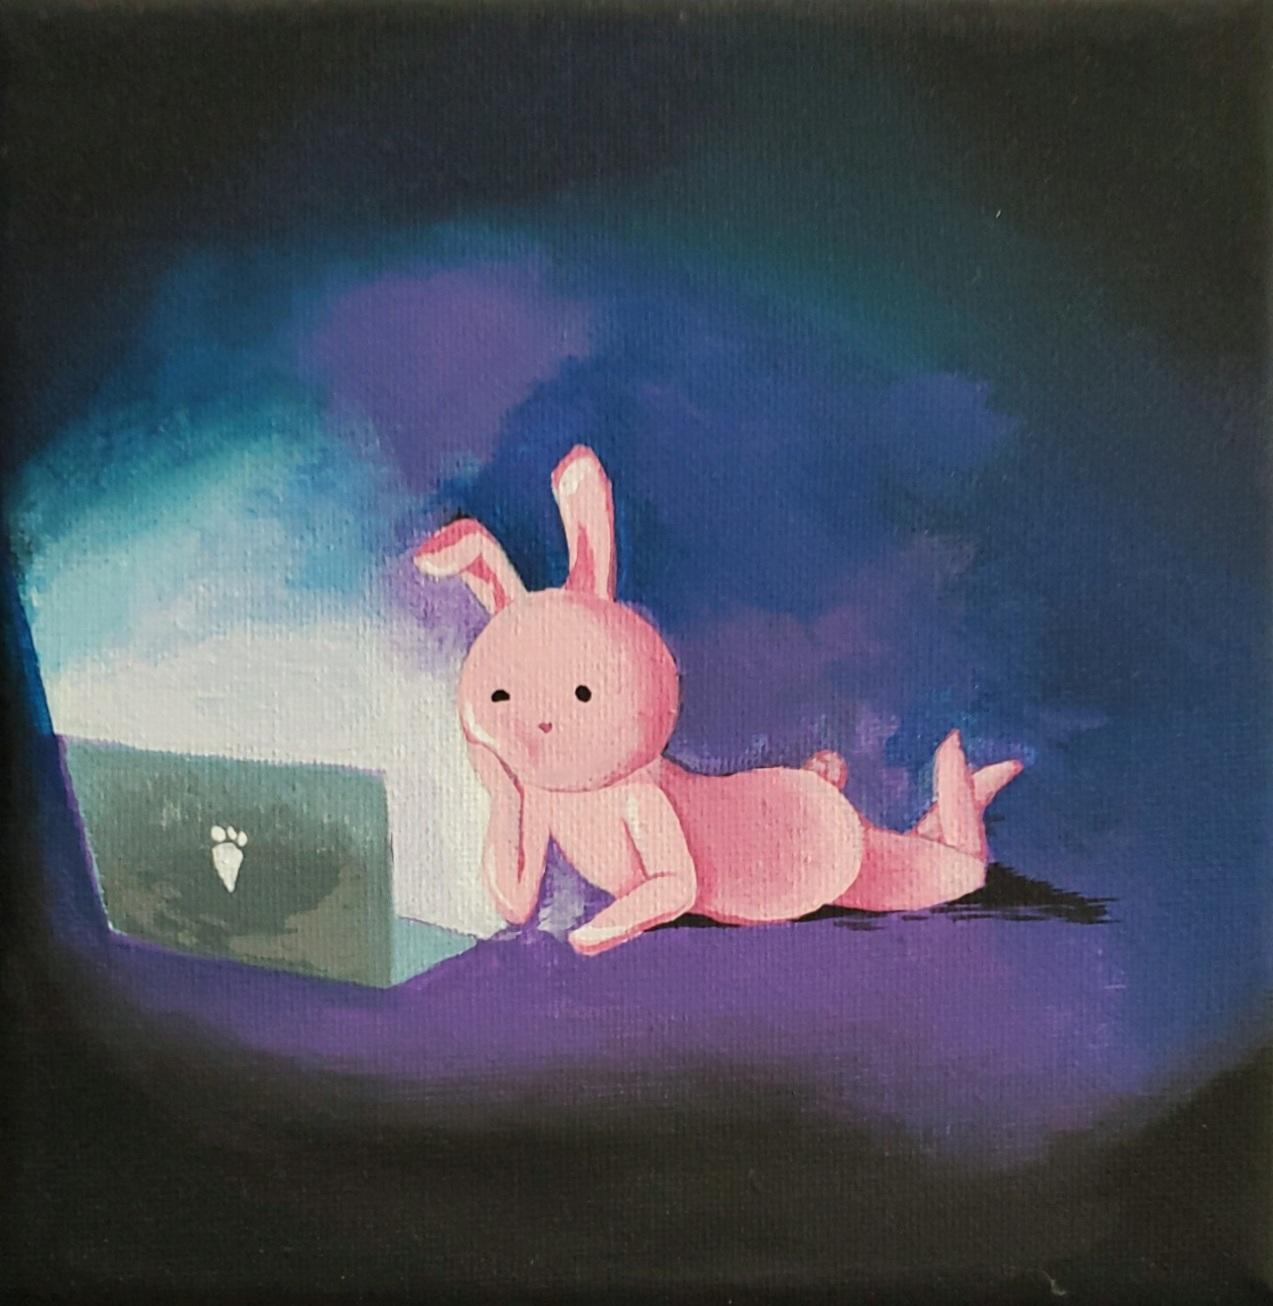 Bunny and computer screen illustration